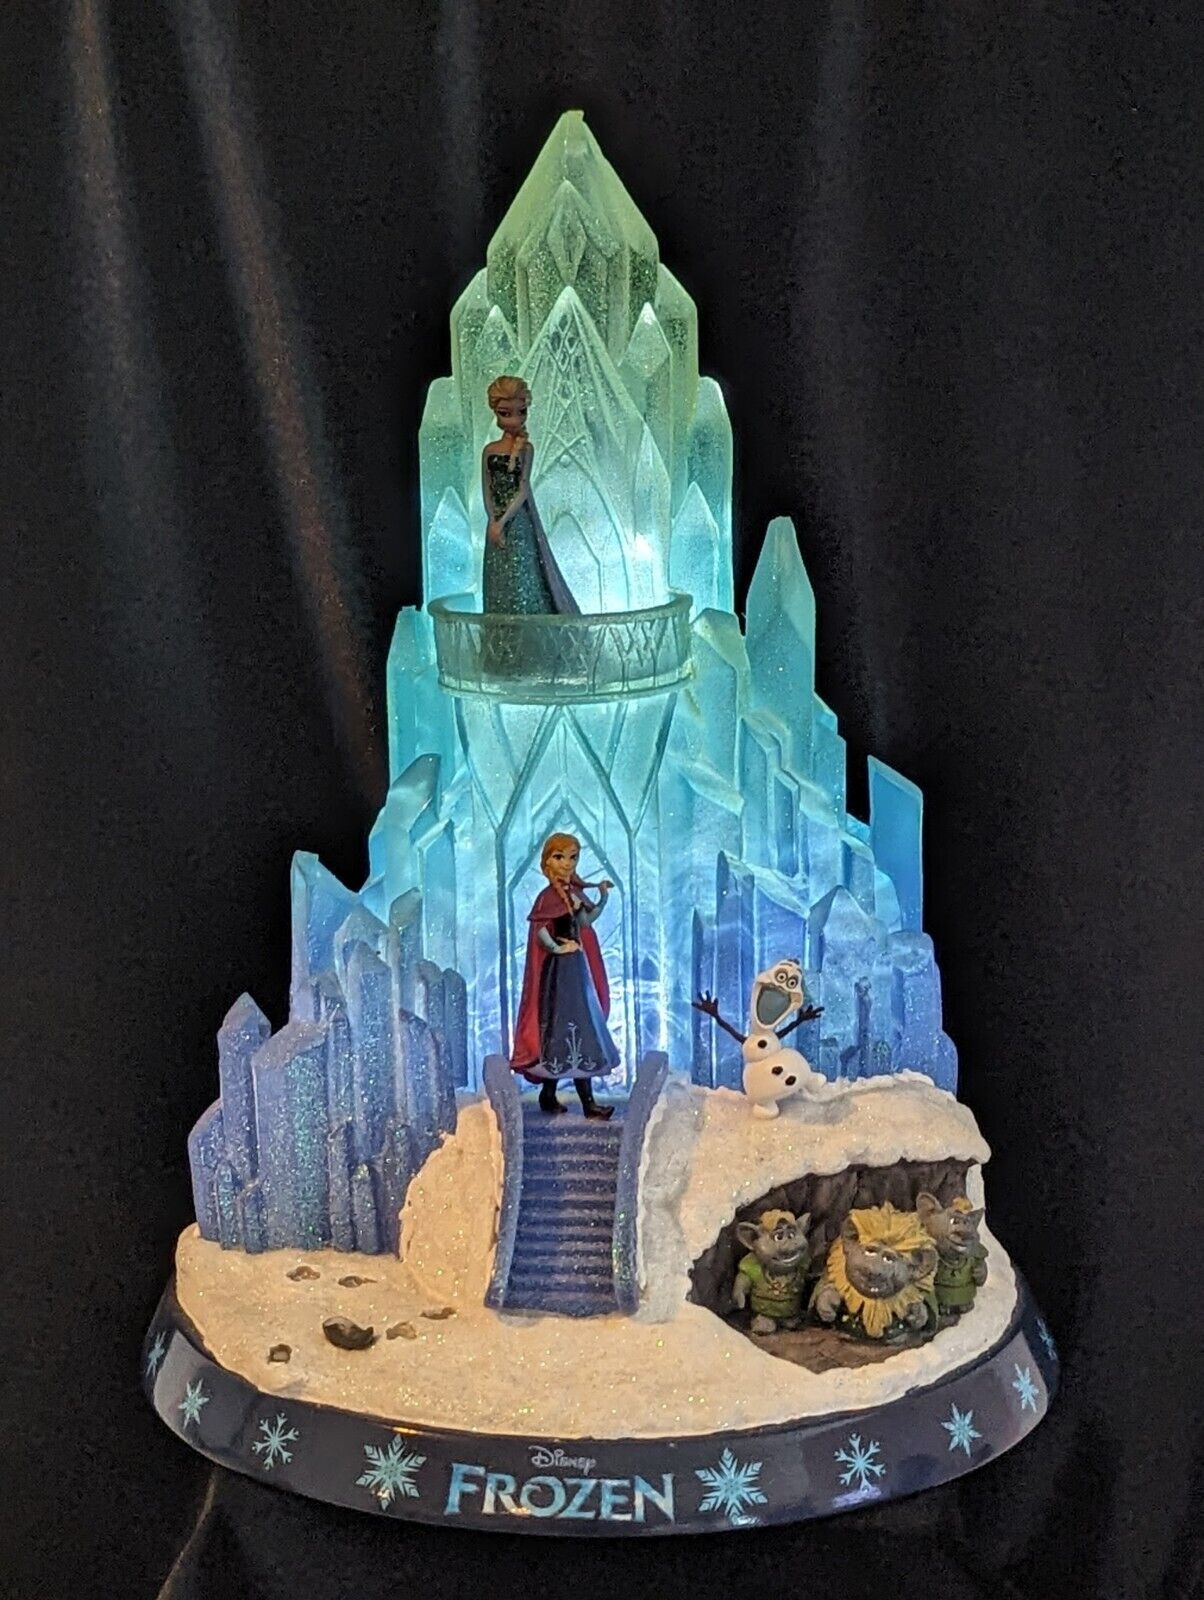 DISNEY FROZEN ICE PALACE SCULPTURE LIMITED EDITION #814 Missing Figurines/ Wear